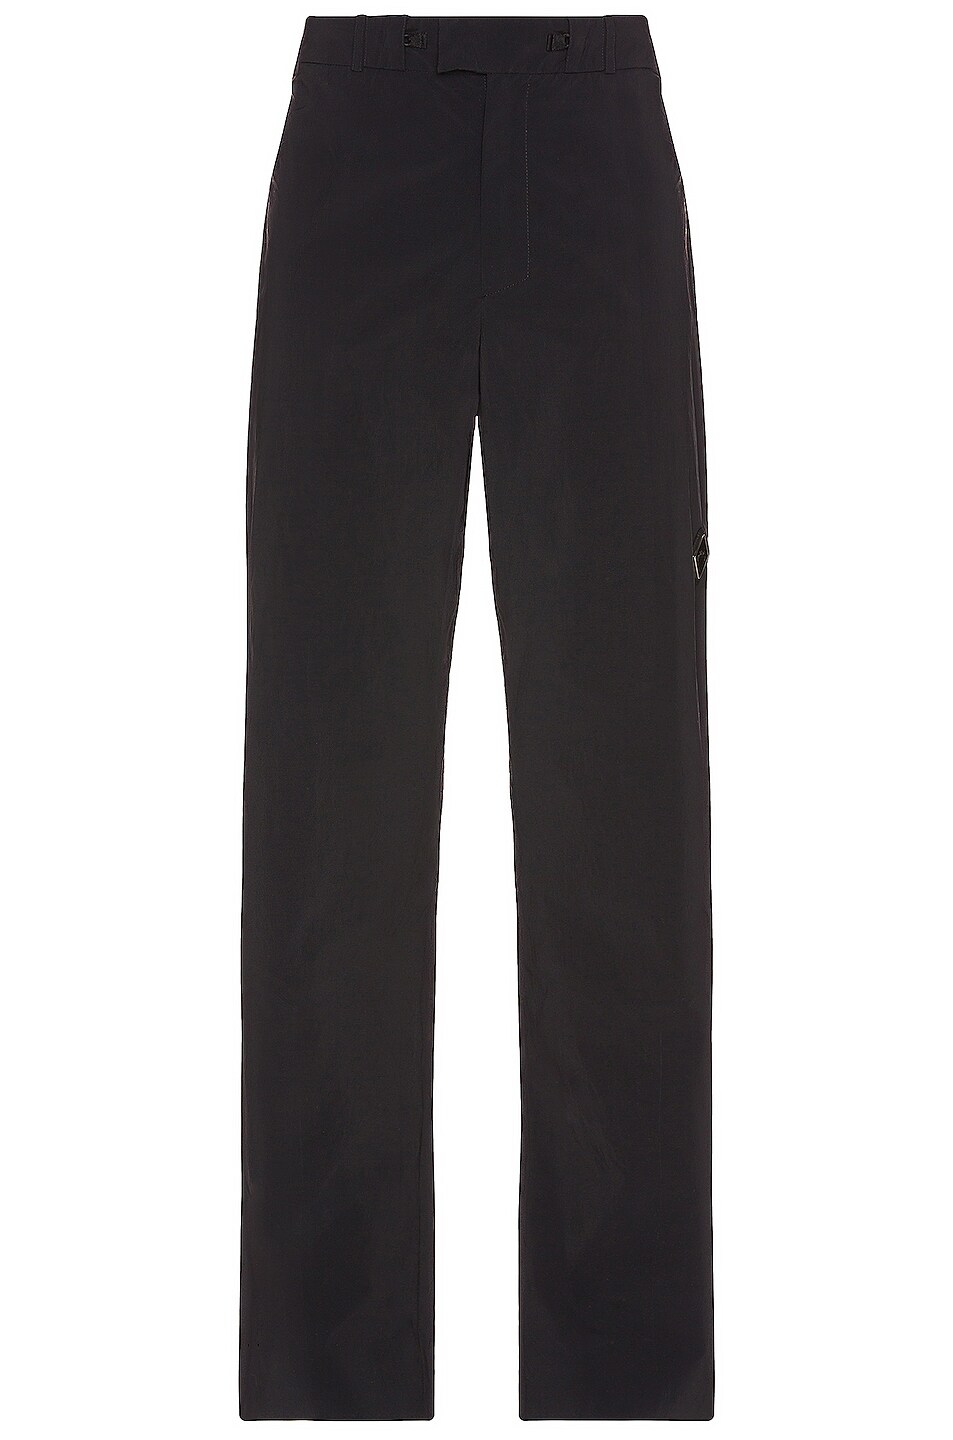 A-COLD-WALL* Stealth Nylon Pants in Black | FWRD